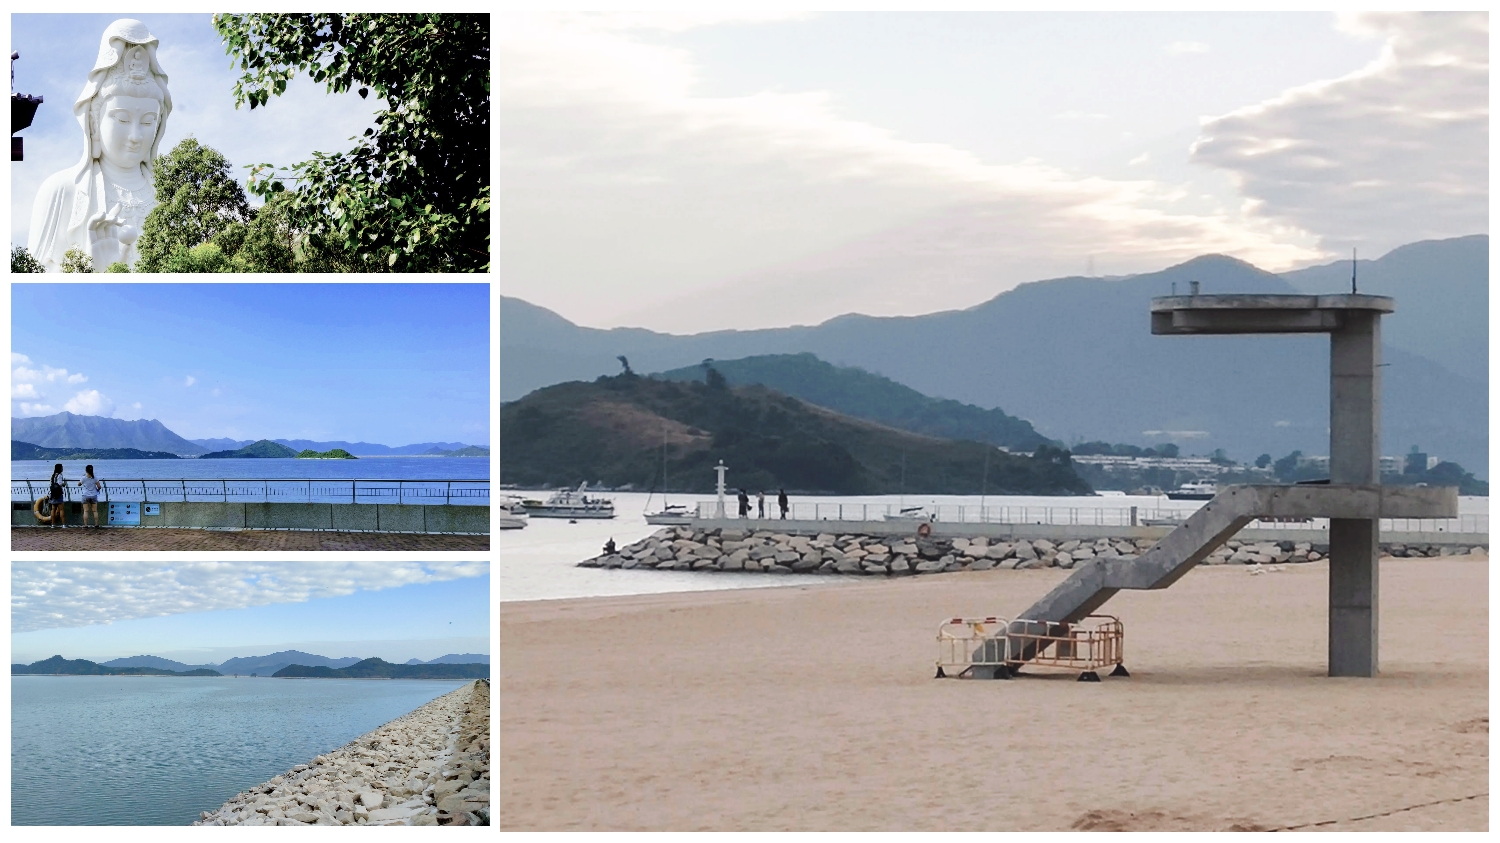 Sightseeing points near the new artificial Long Mei Beach.